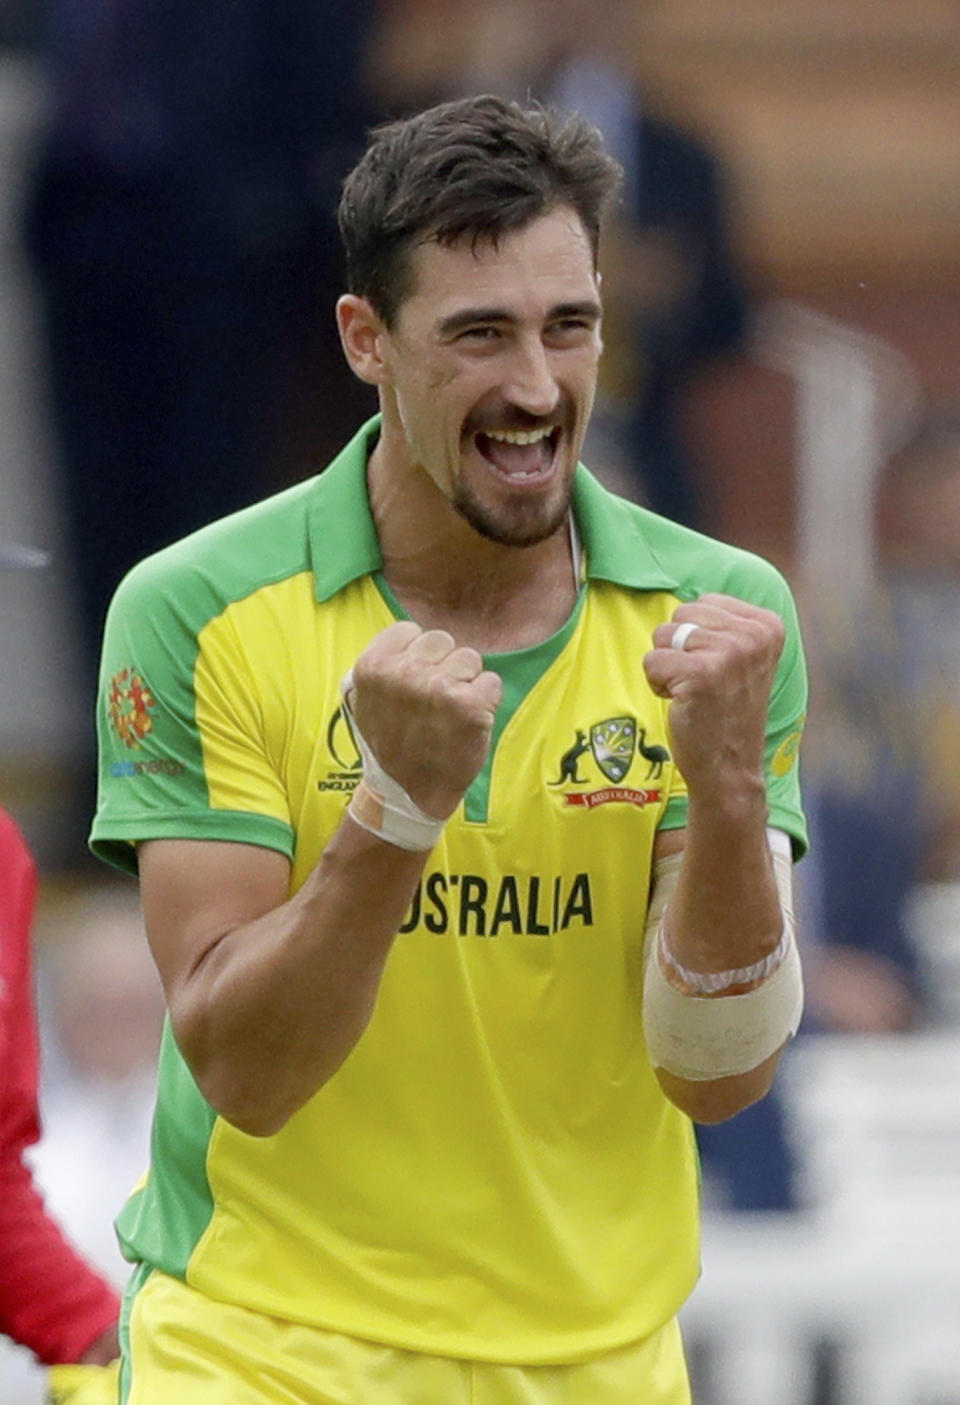 Australia's Mitchell Starc celebrates taking the wicket of England's captain Eoin Morgan during the Cricket World Cup match between England and Australia at Lord's cricket ground in London, Tuesday, June 25, 2019. (AP Photo/Matt Dunham)